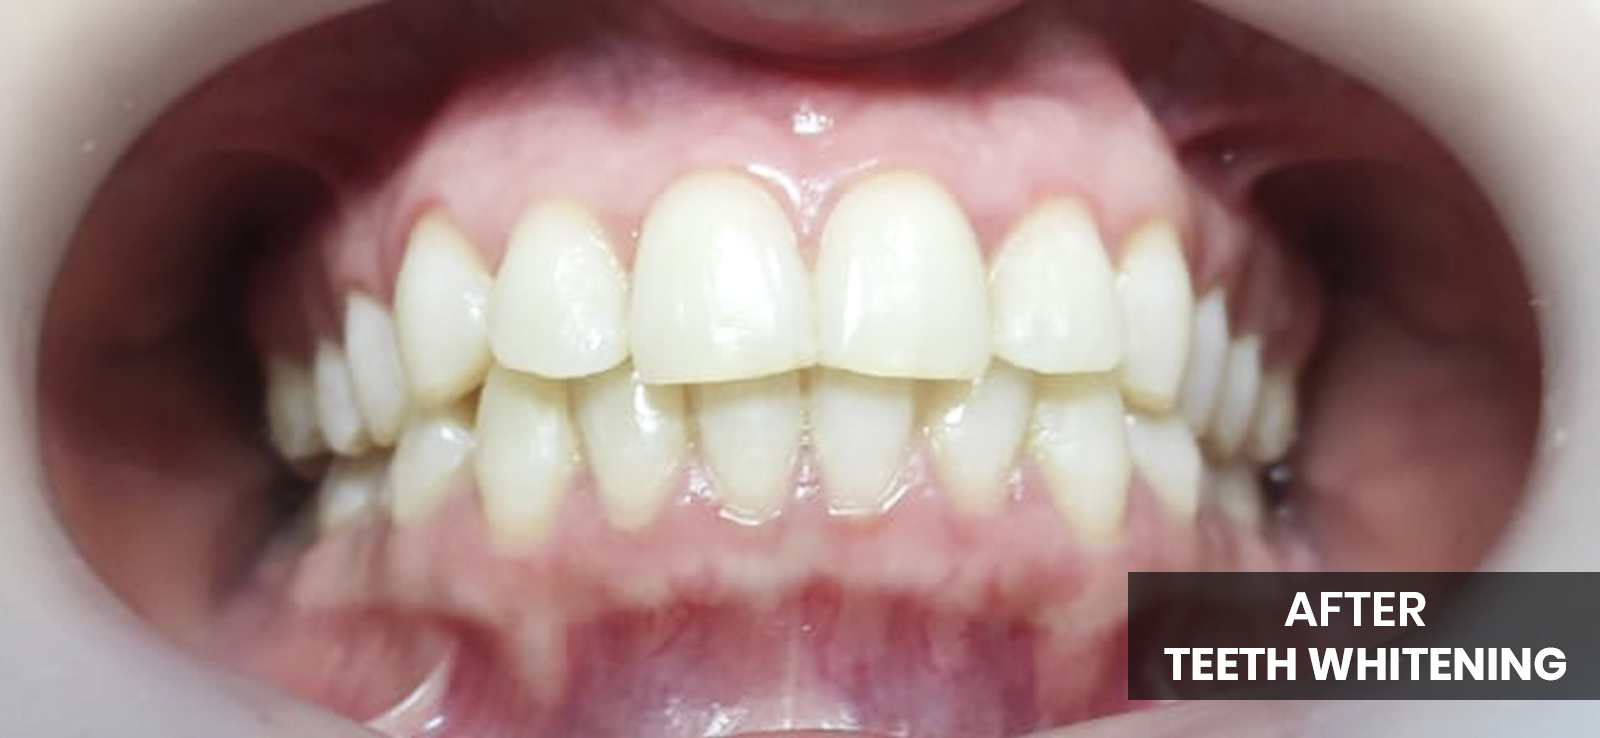 after teeth whitening 1600x738